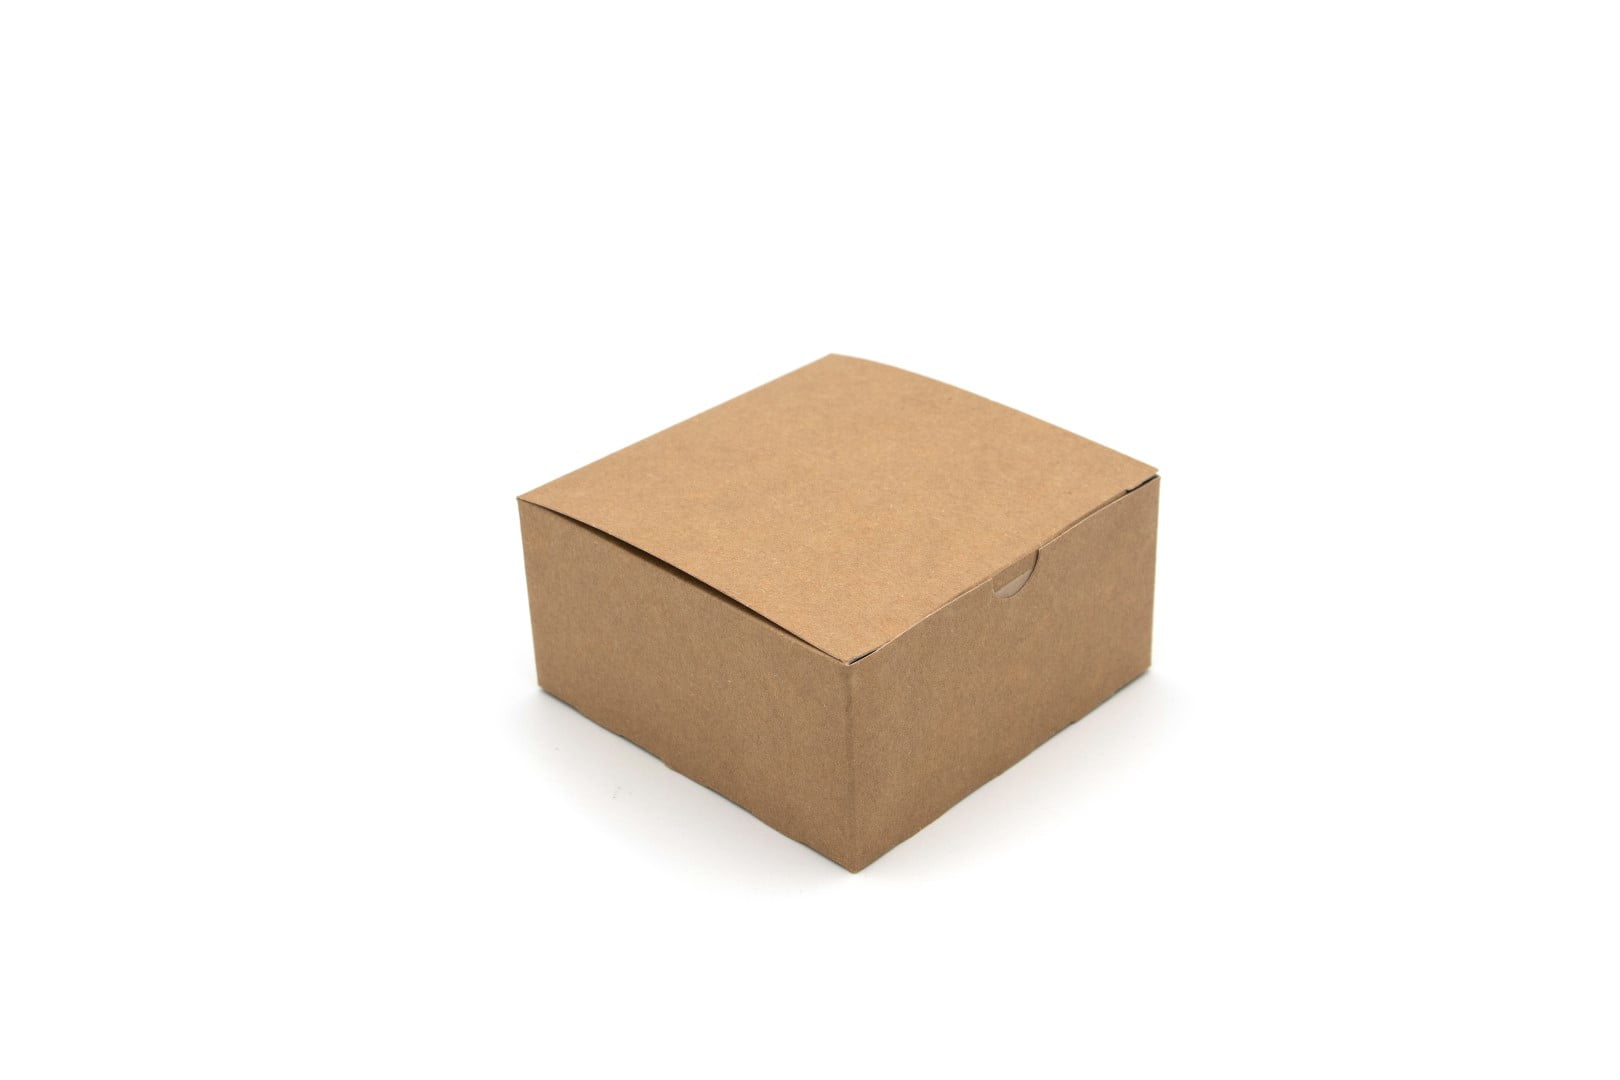 Details about   X25 Burger Boxes compostable board recyclable biodegradable the green effect new 